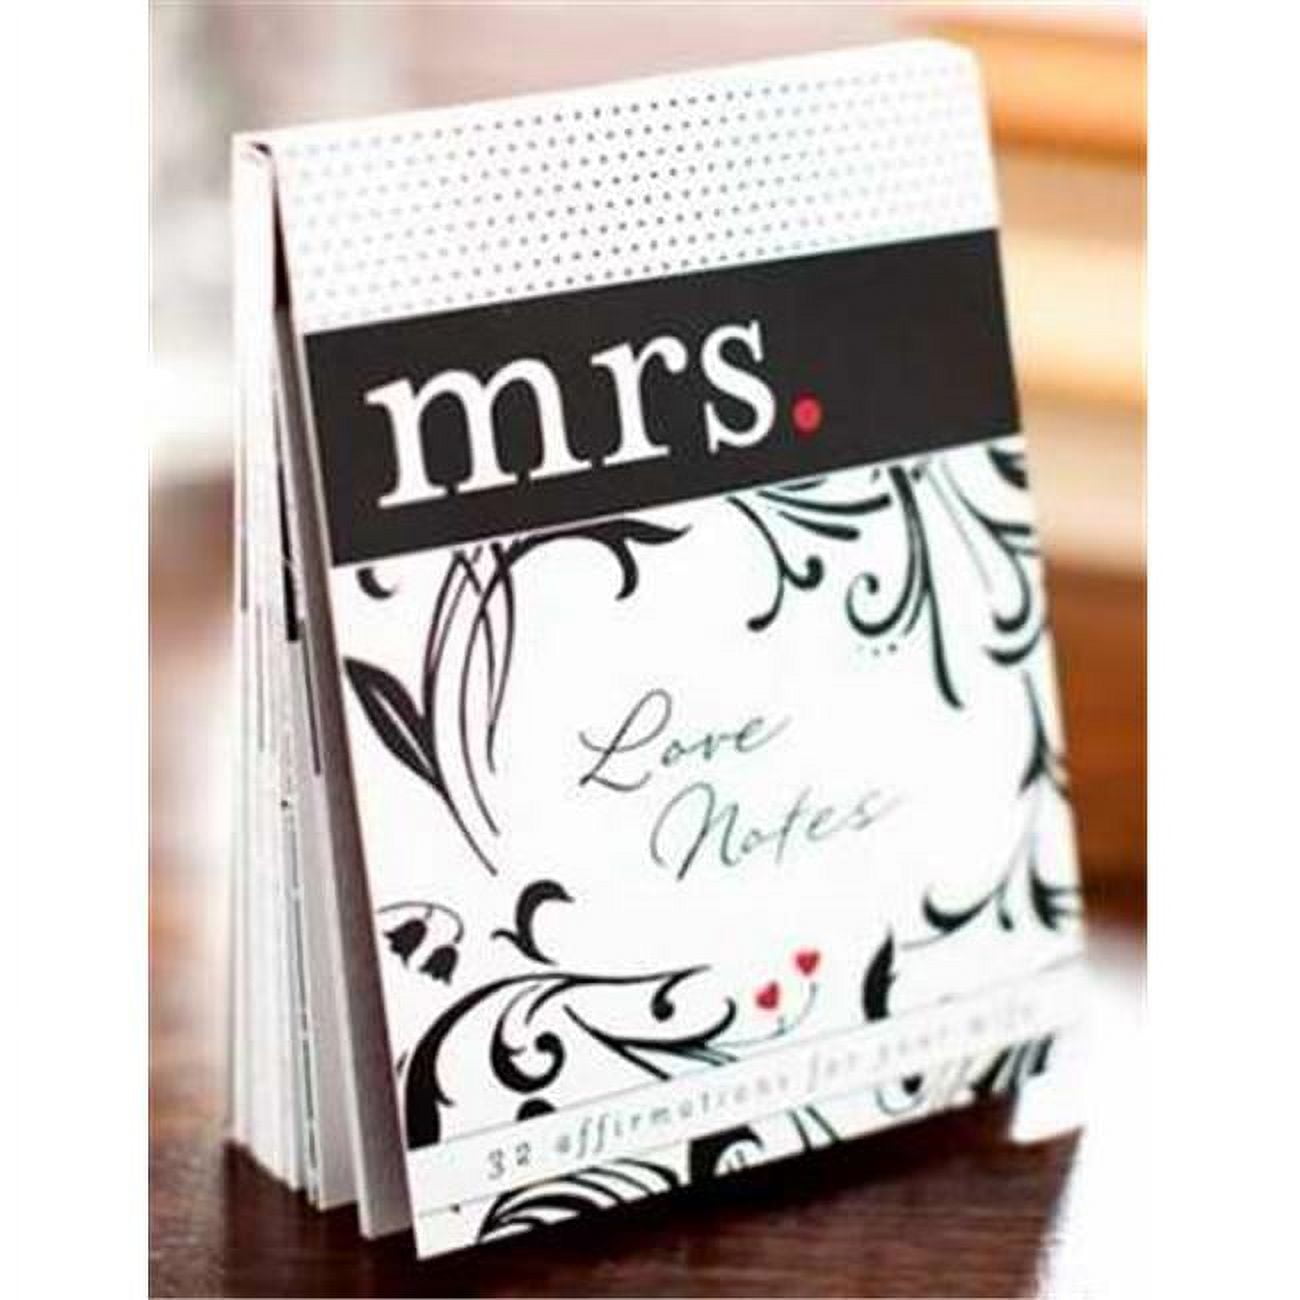 Day Spring cards 95561 Note Card-Mrs. Love Notes 32 Affirmations for your Wife, Pack of 32